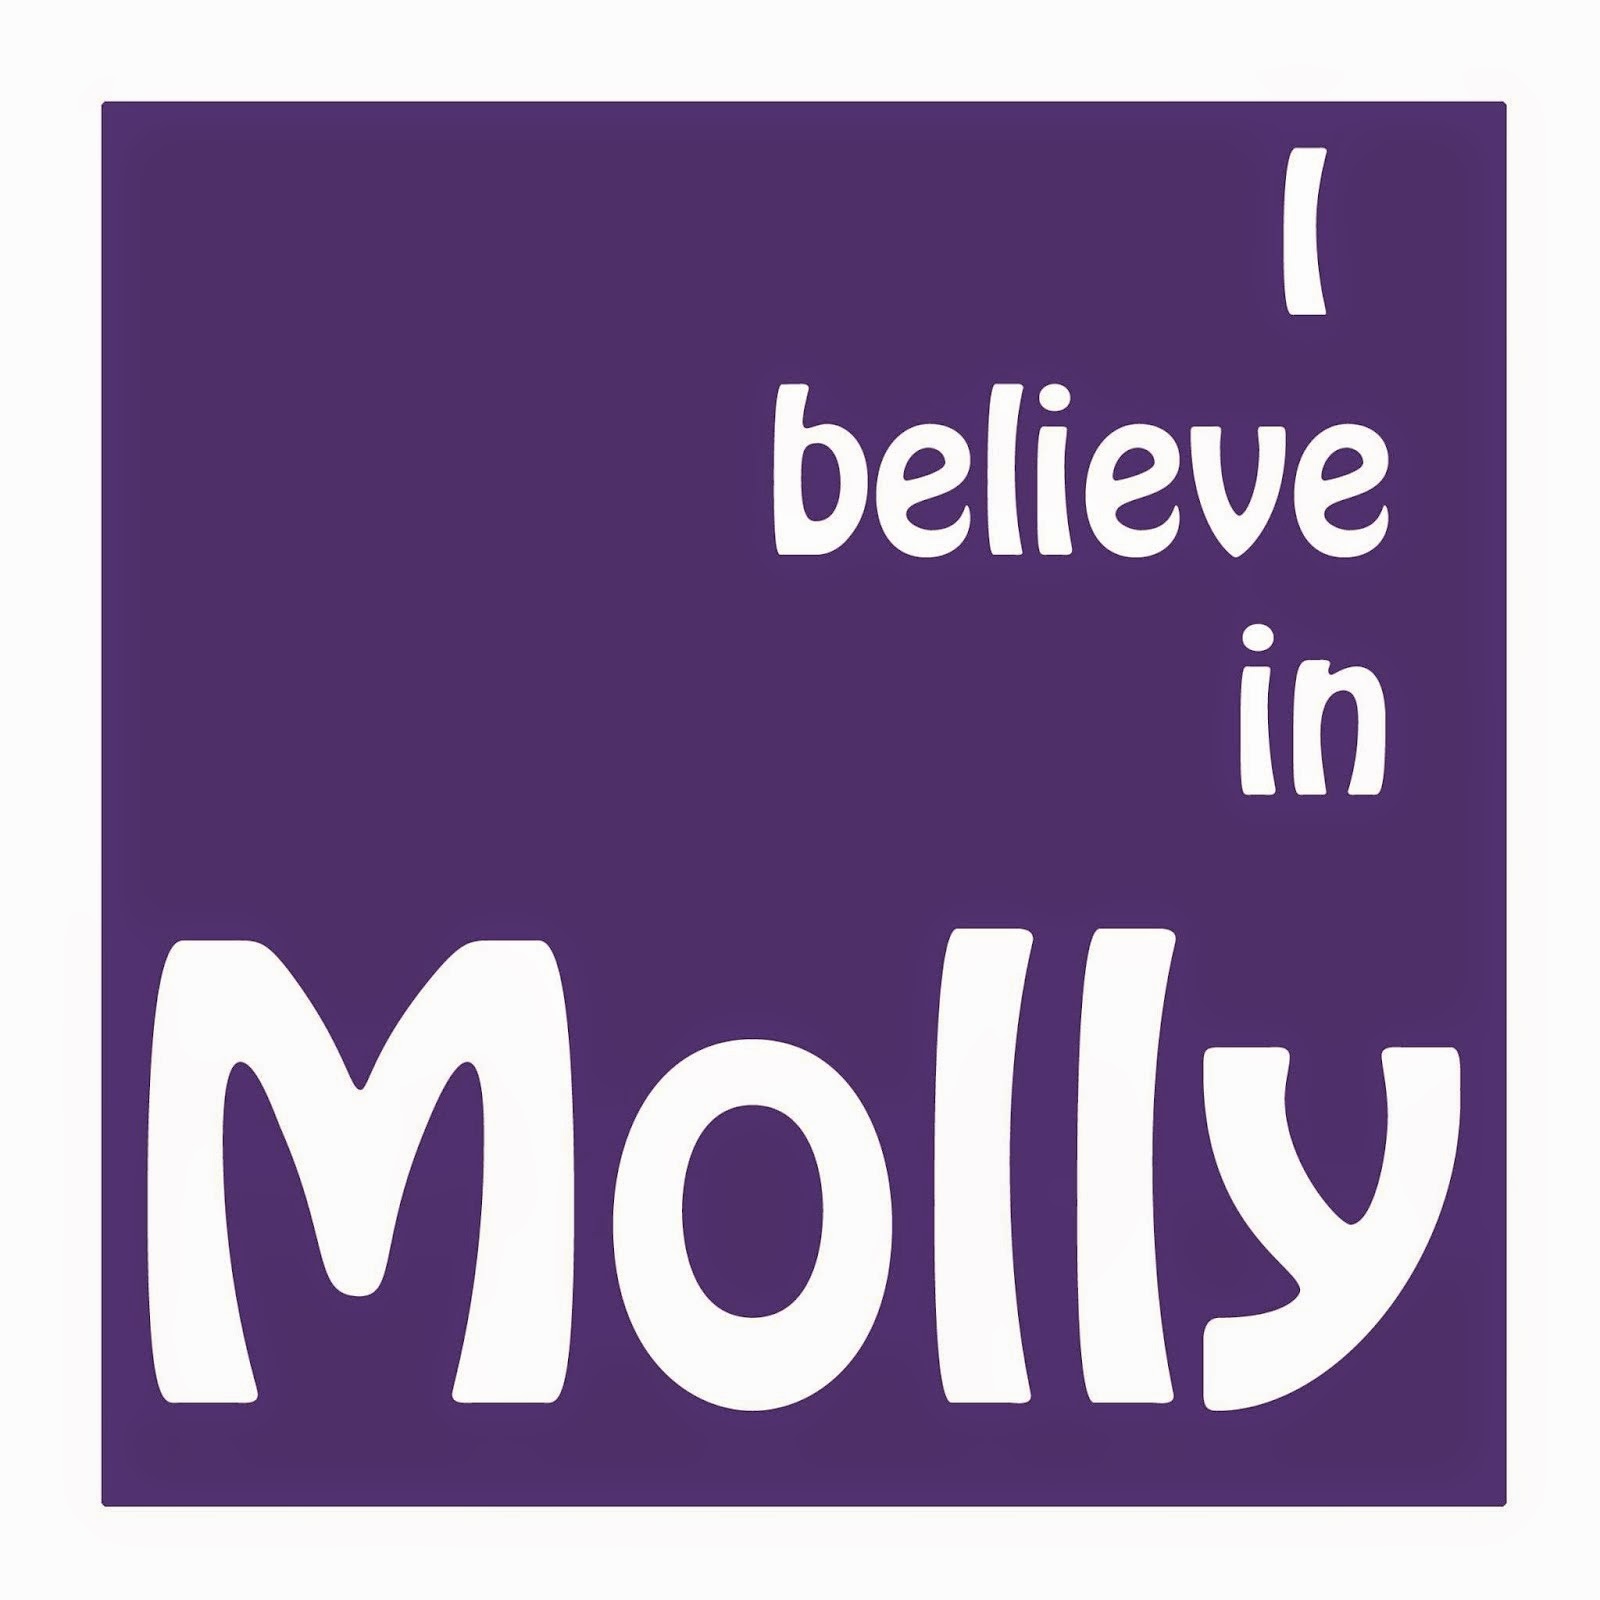 The Miracles for Molly Dunne Foundation